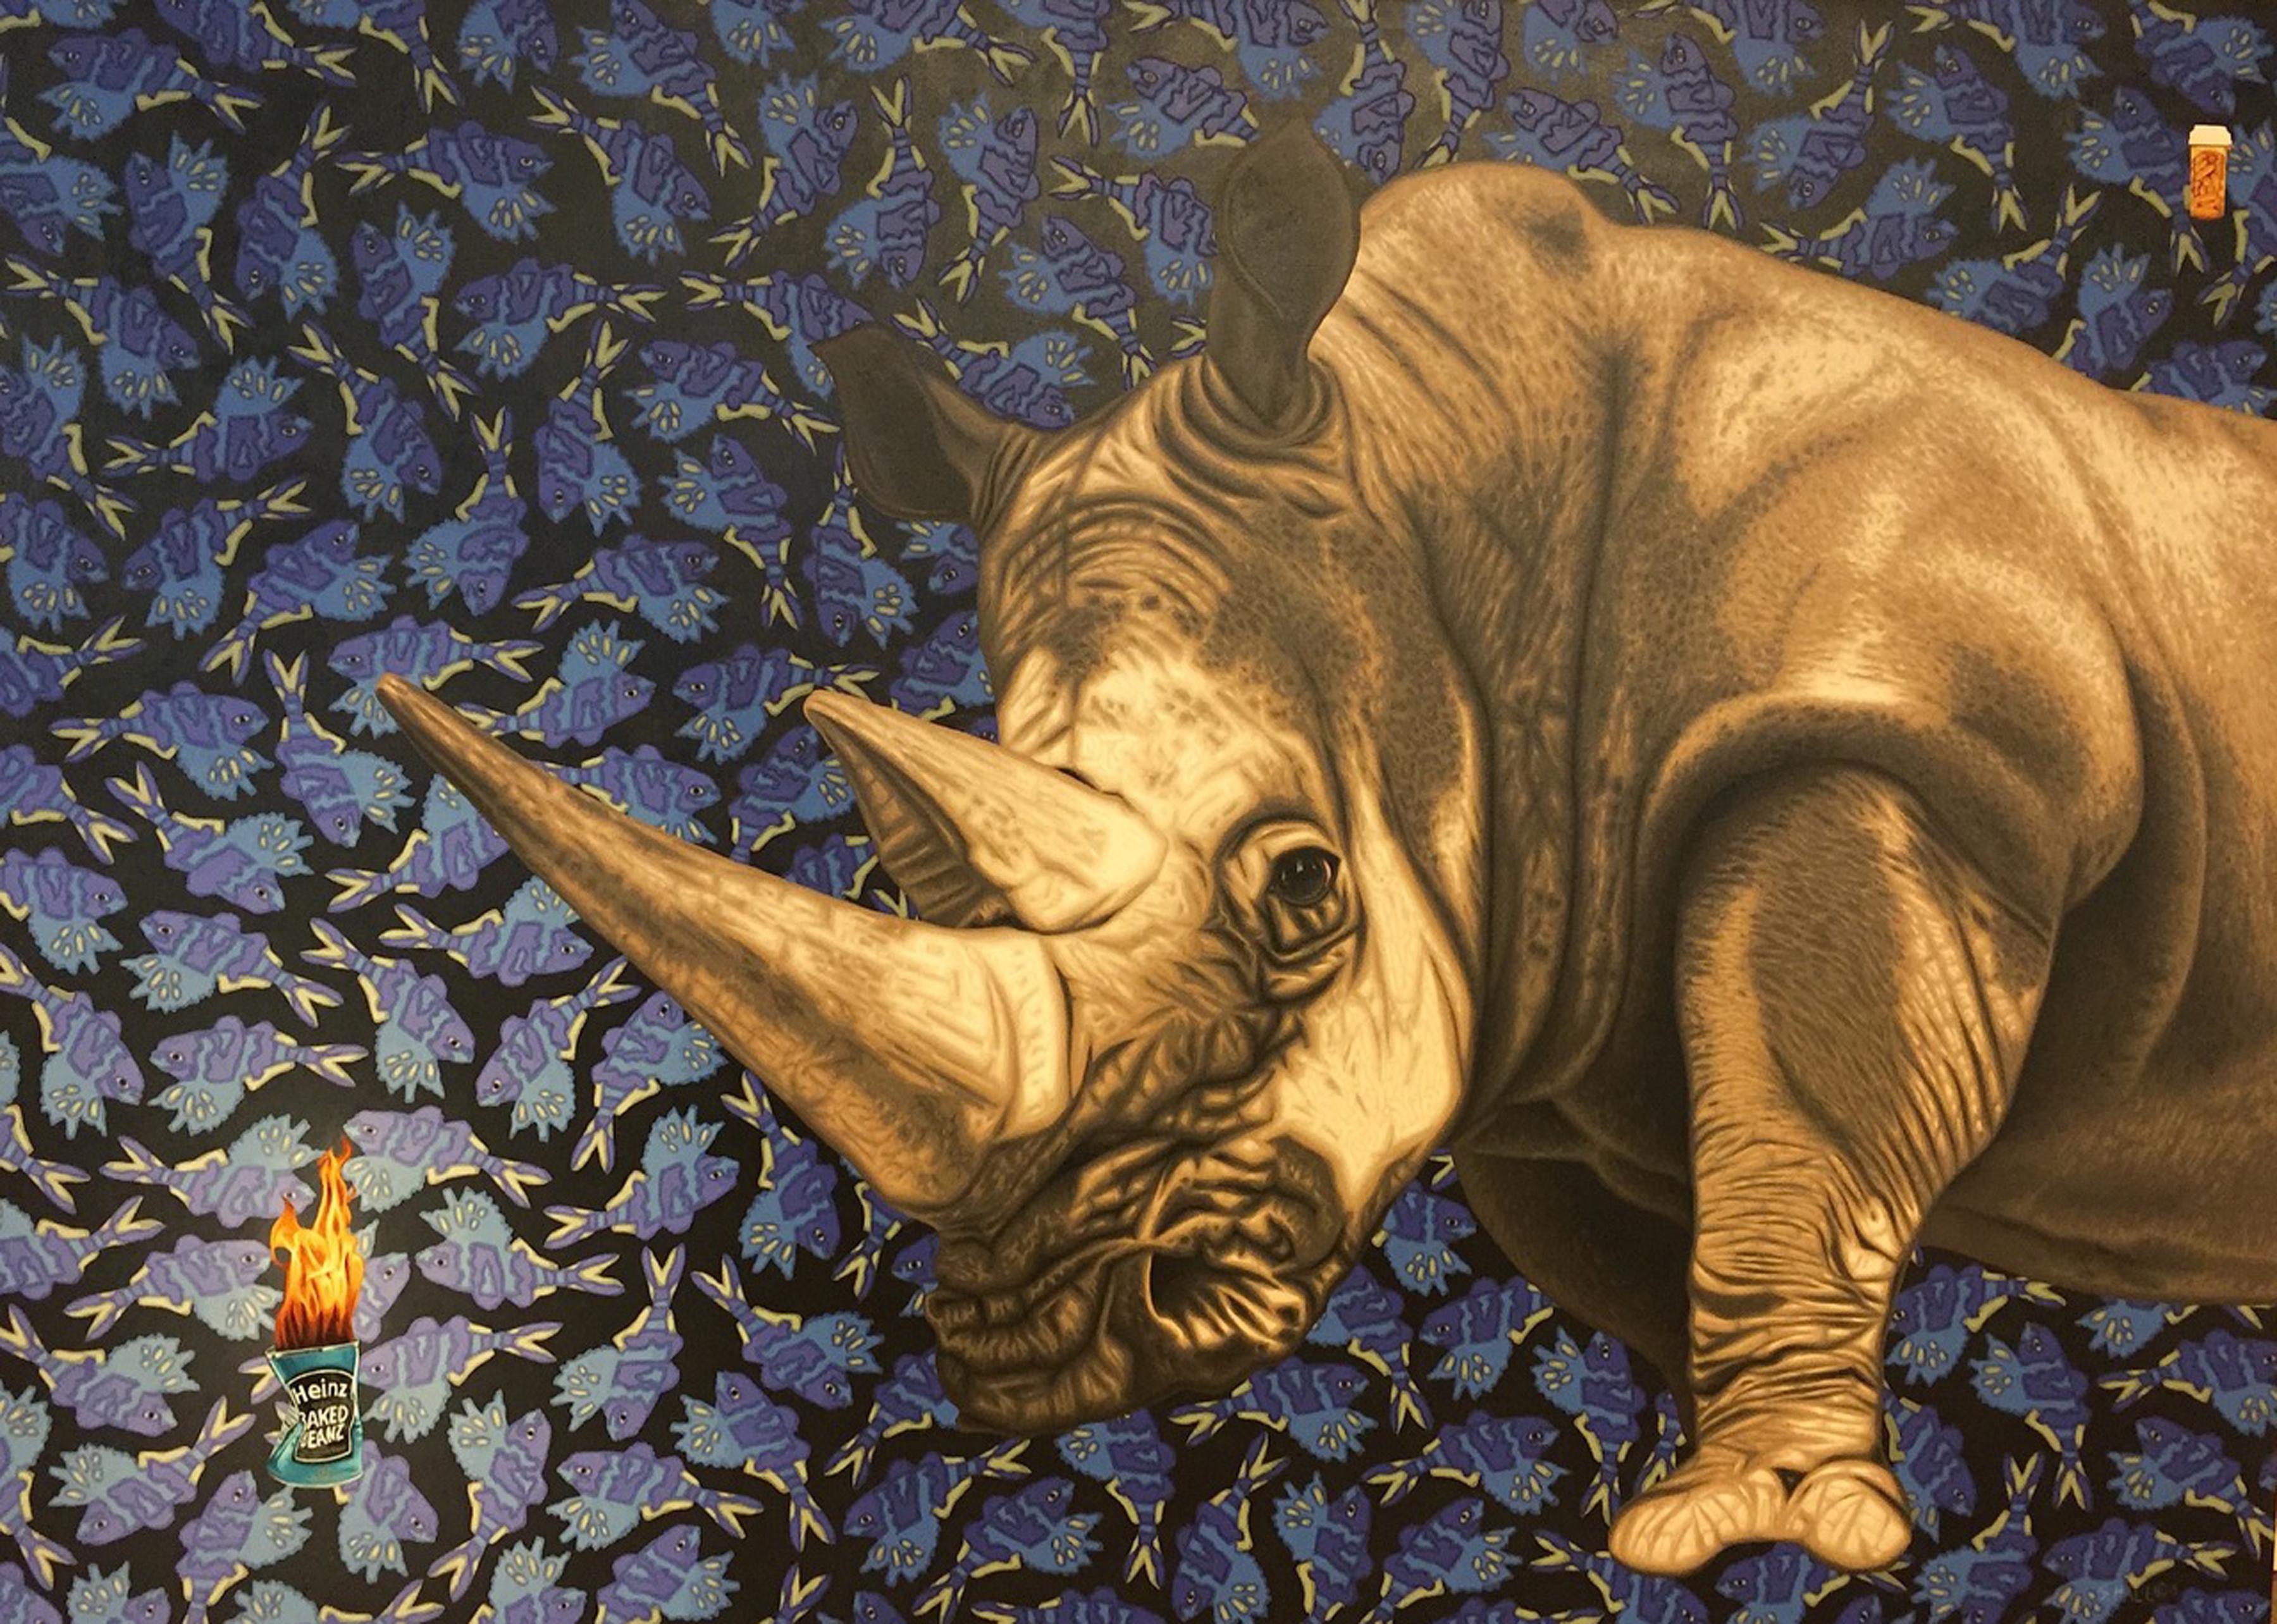 Stephen Hall Still-Life Painting - Painting of Rhino with can of Heniz Beans: 'The Pills Don't Seem To Be Working'